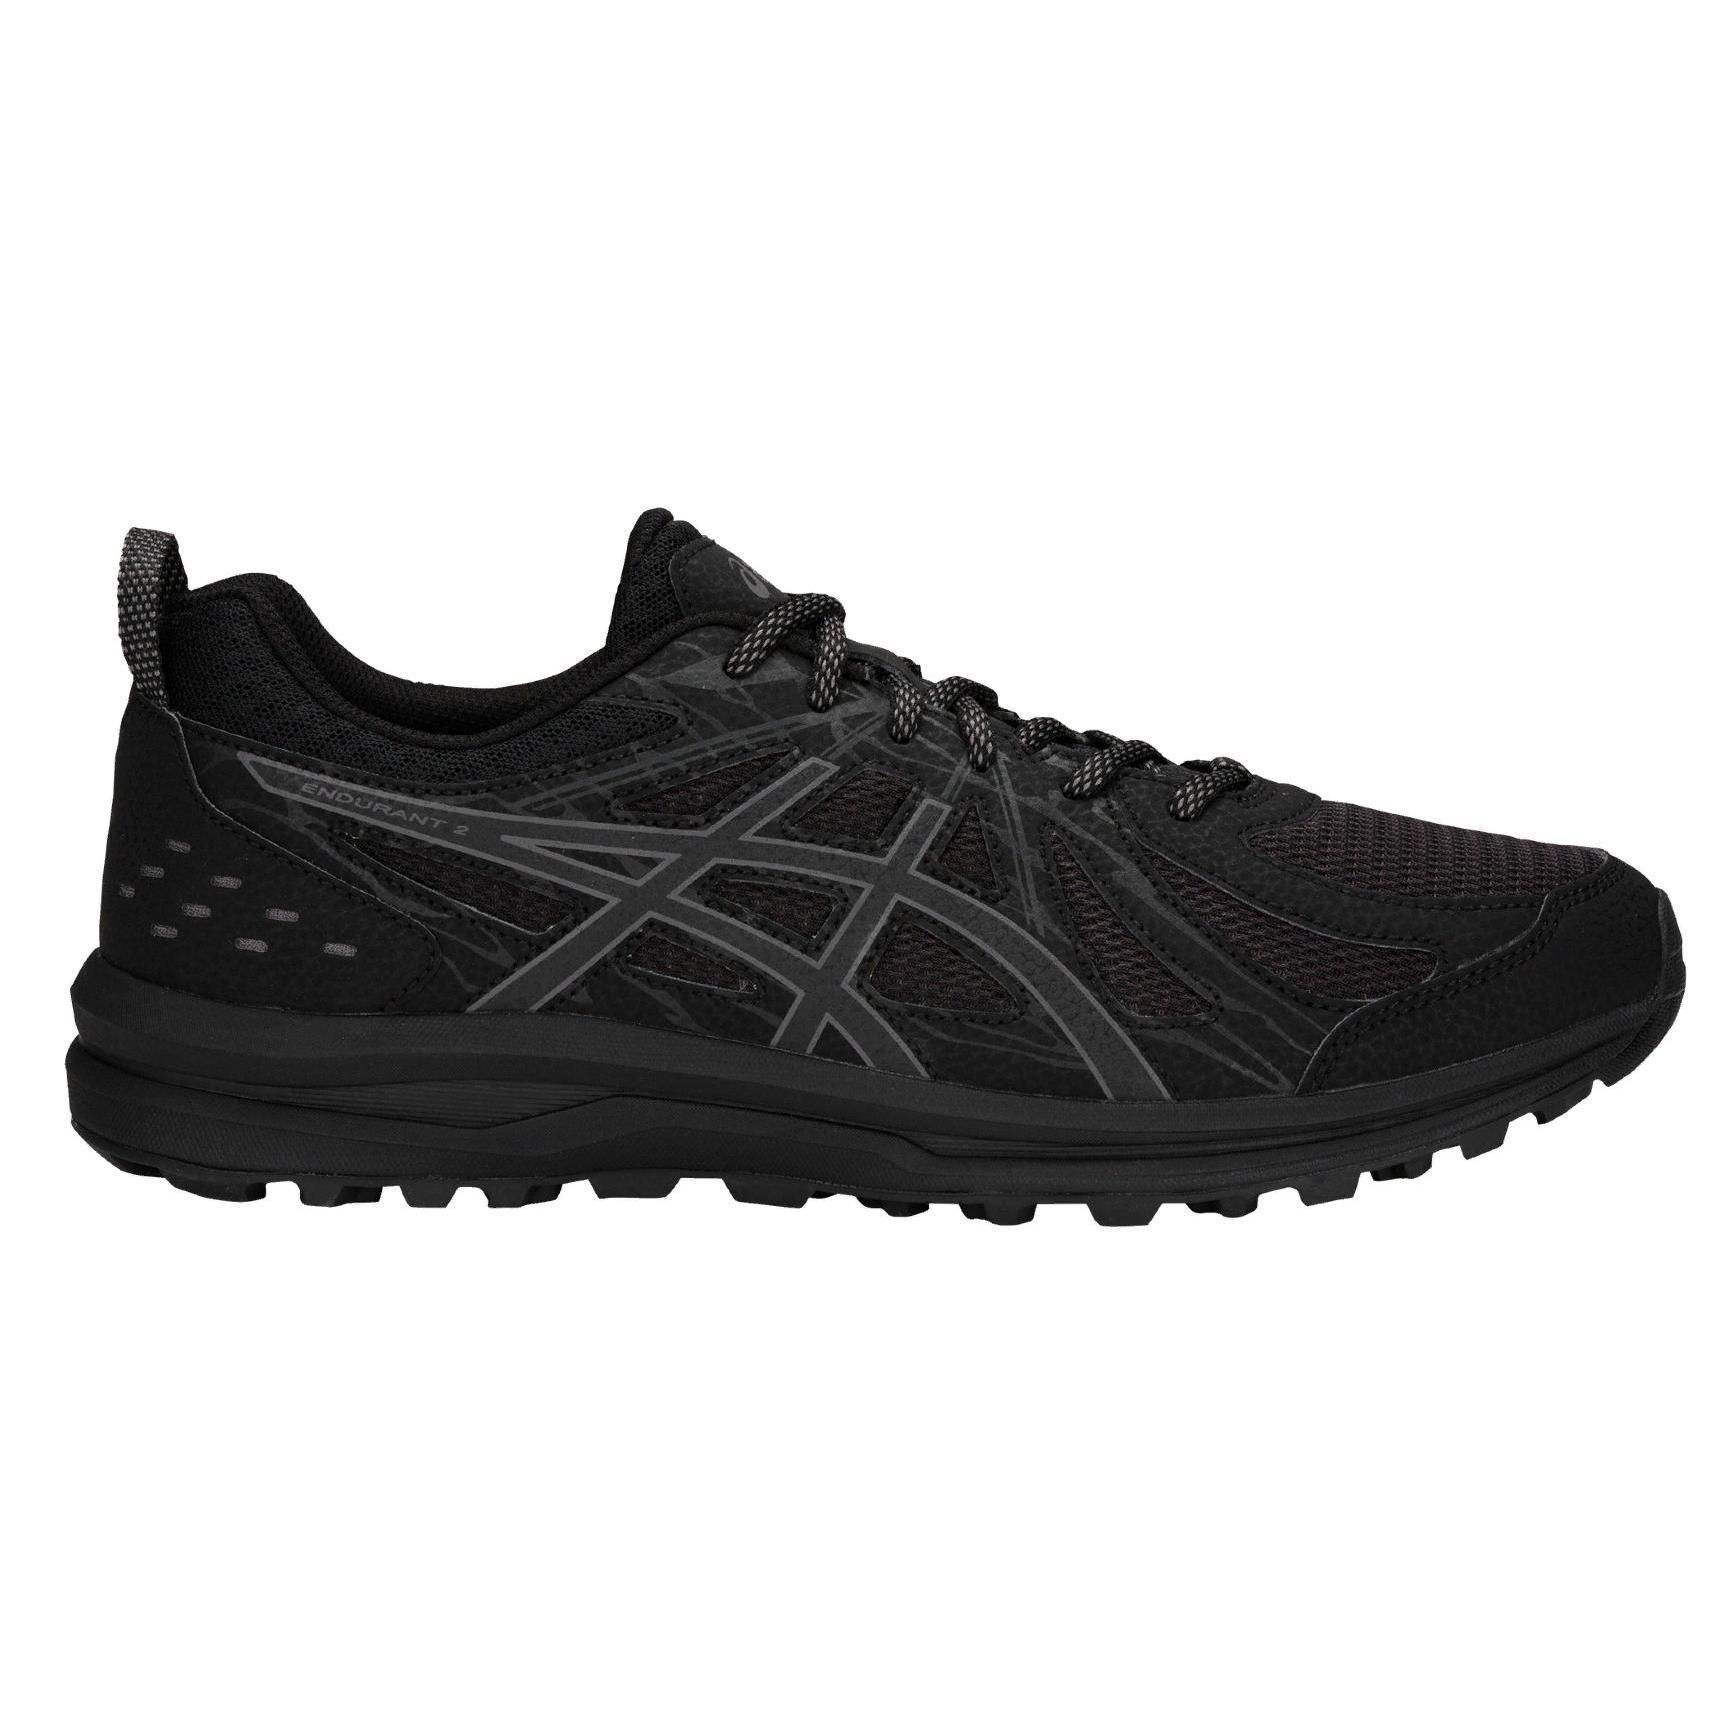 asics gel frequent trail